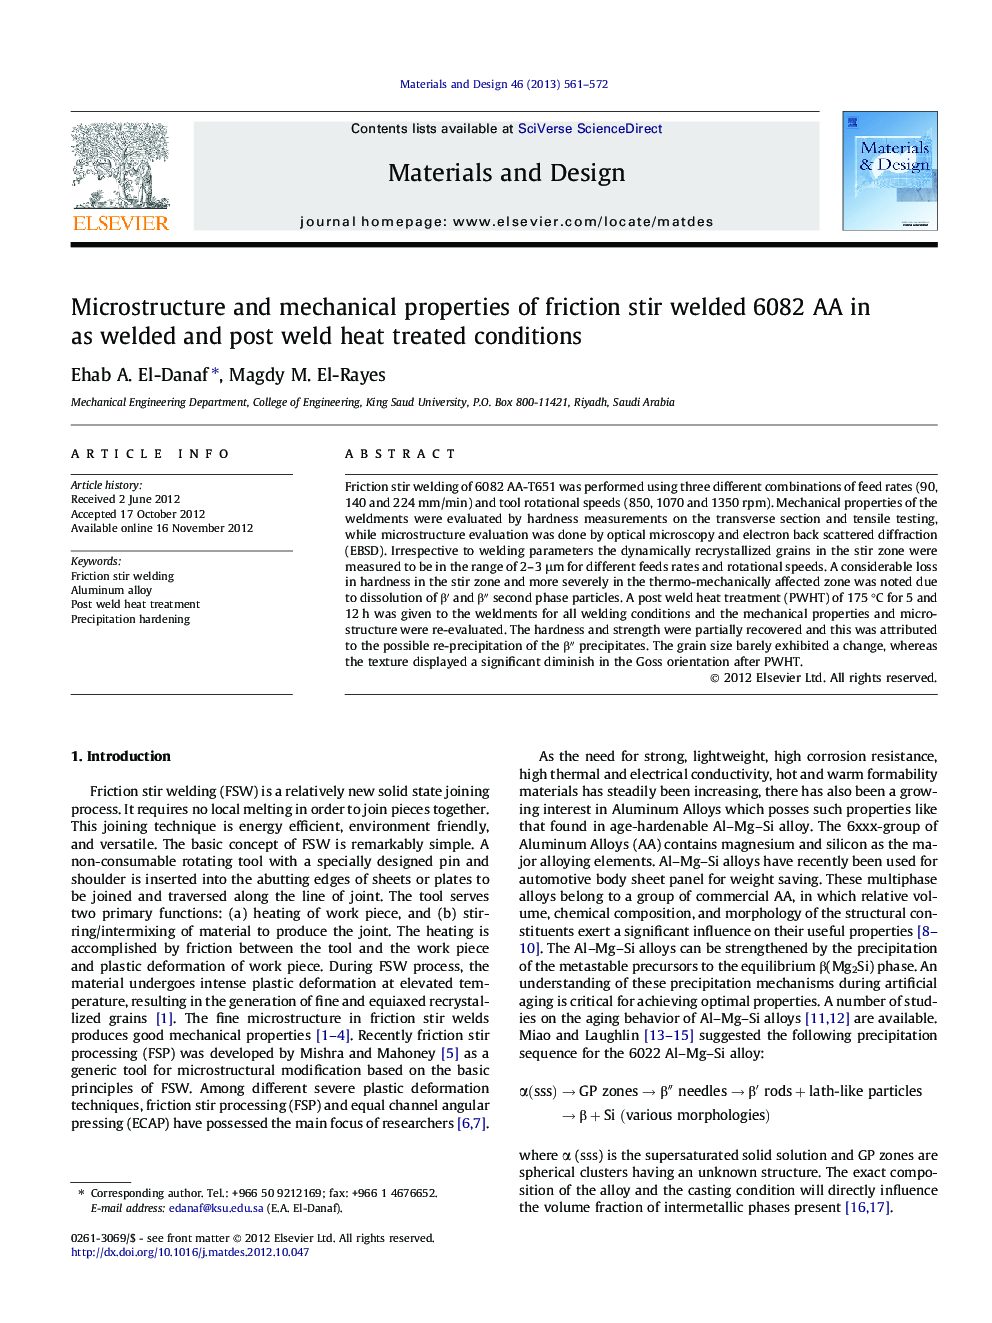 Microstructure and mechanical properties of friction stir welded 6082 AA in as welded and post weld heat treated conditions